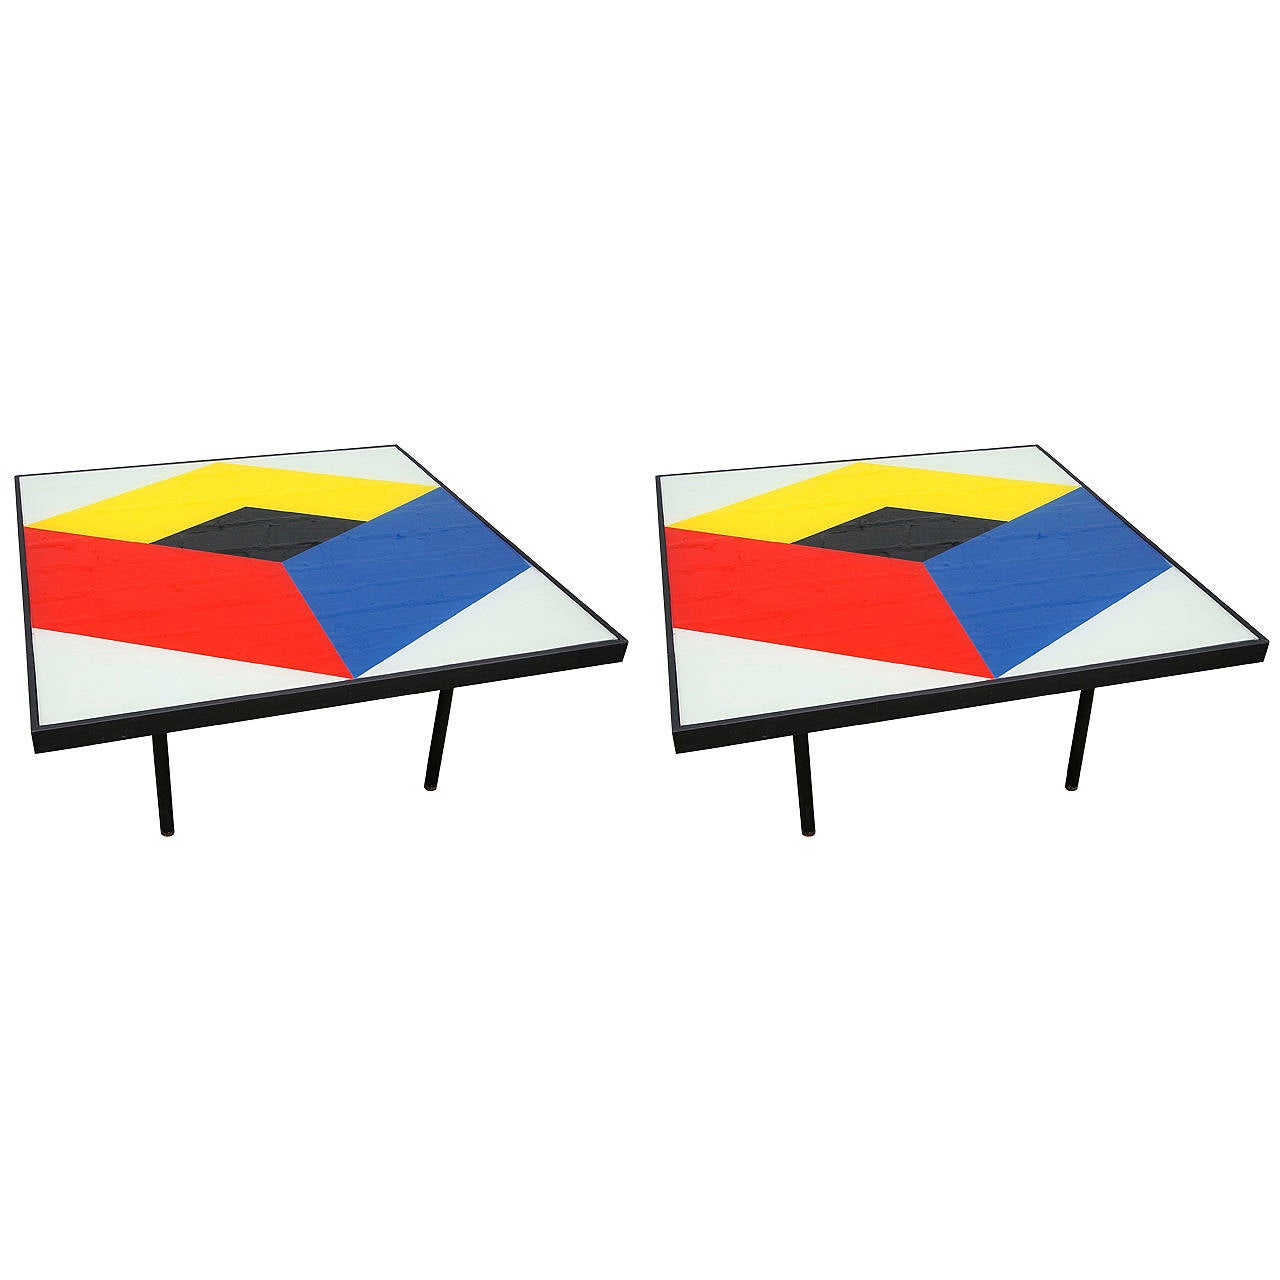 Pair of 1960s reverse painted glass coffee tables with colorful, geometric design in blue read and yellow.